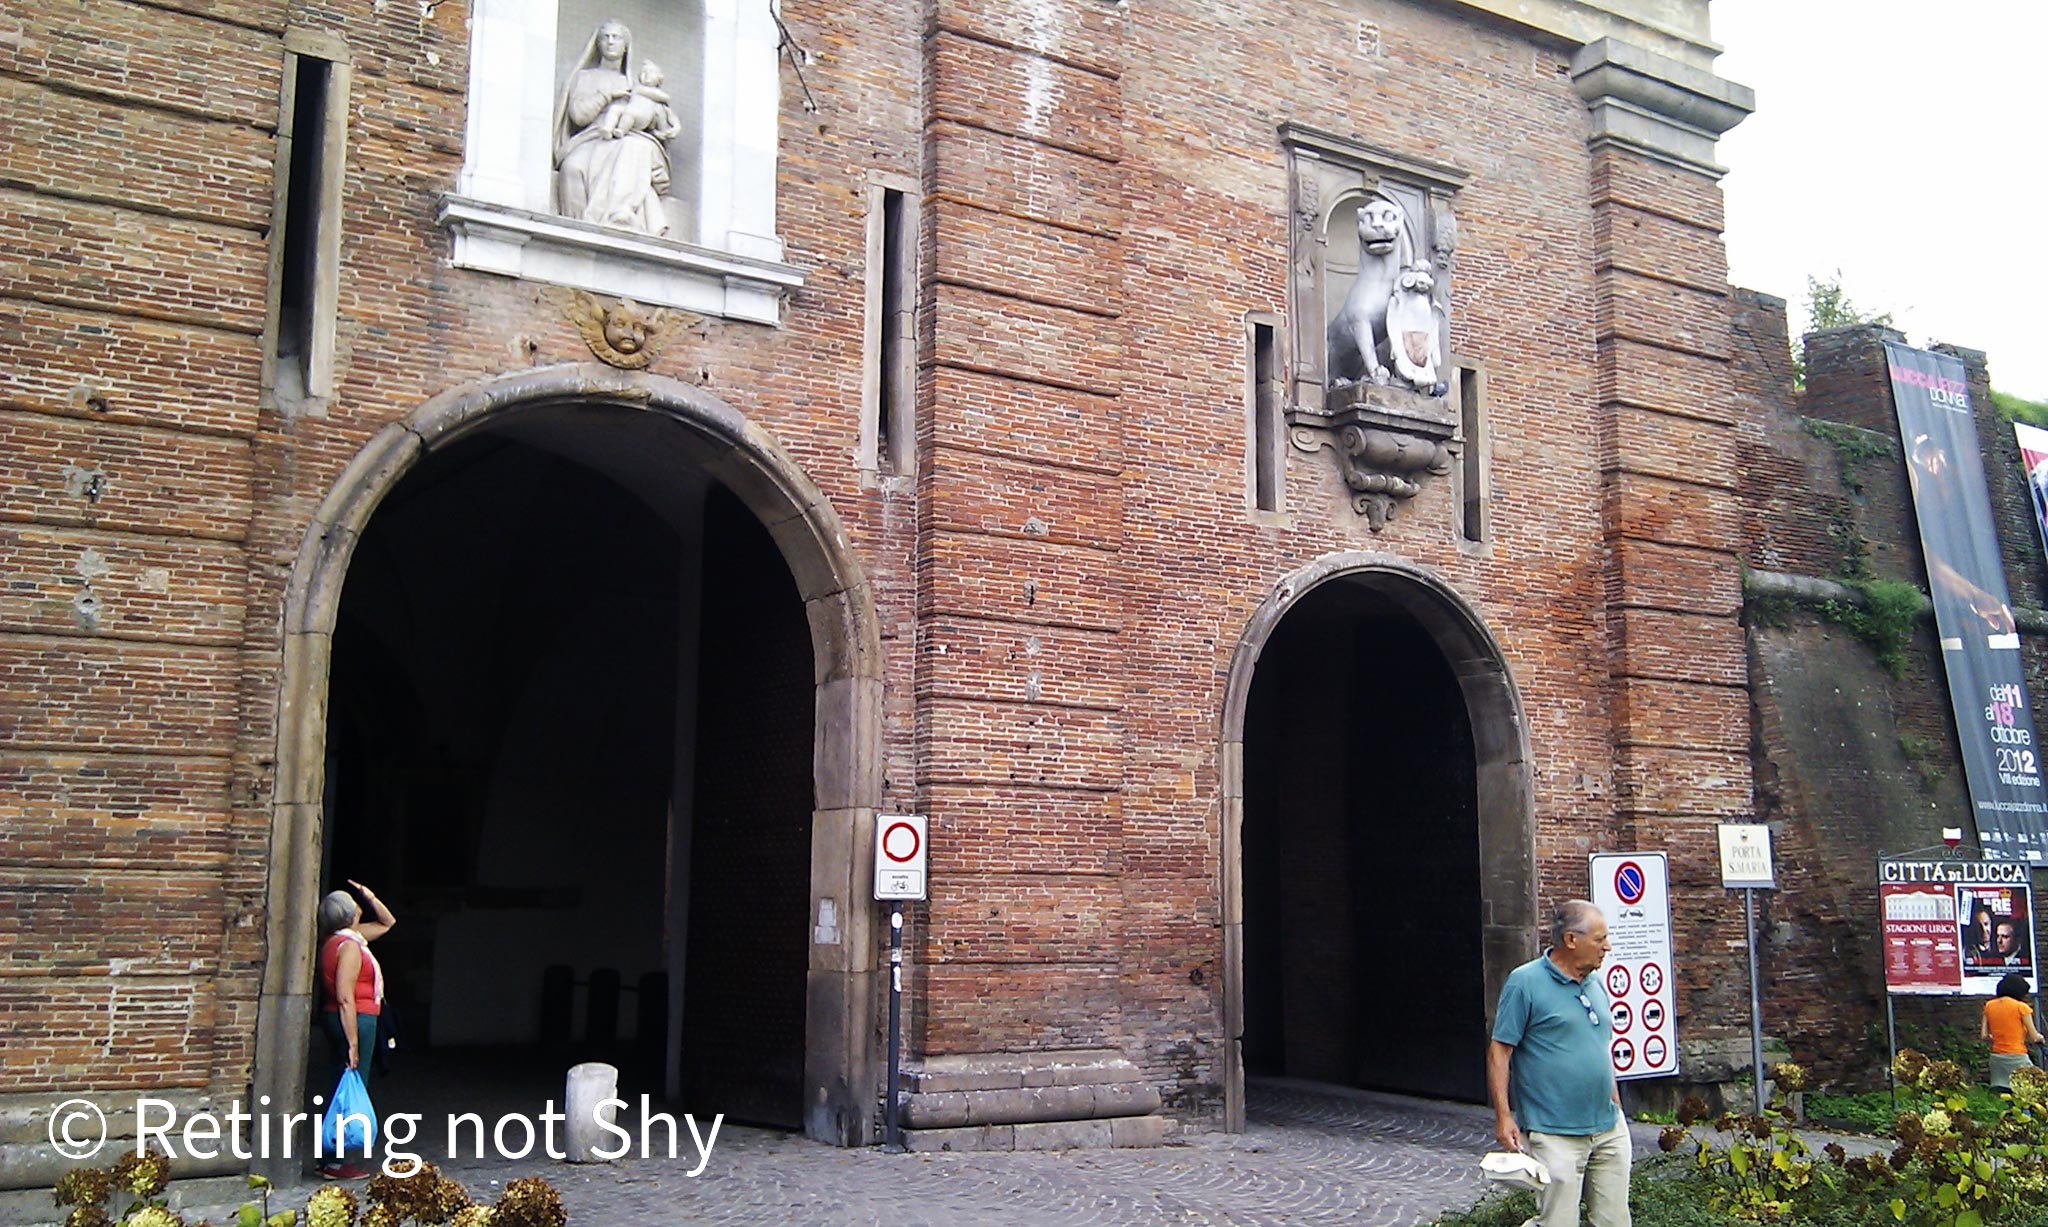 People near the walled entrance to the old City of Lucca, brick walls with arches and statues